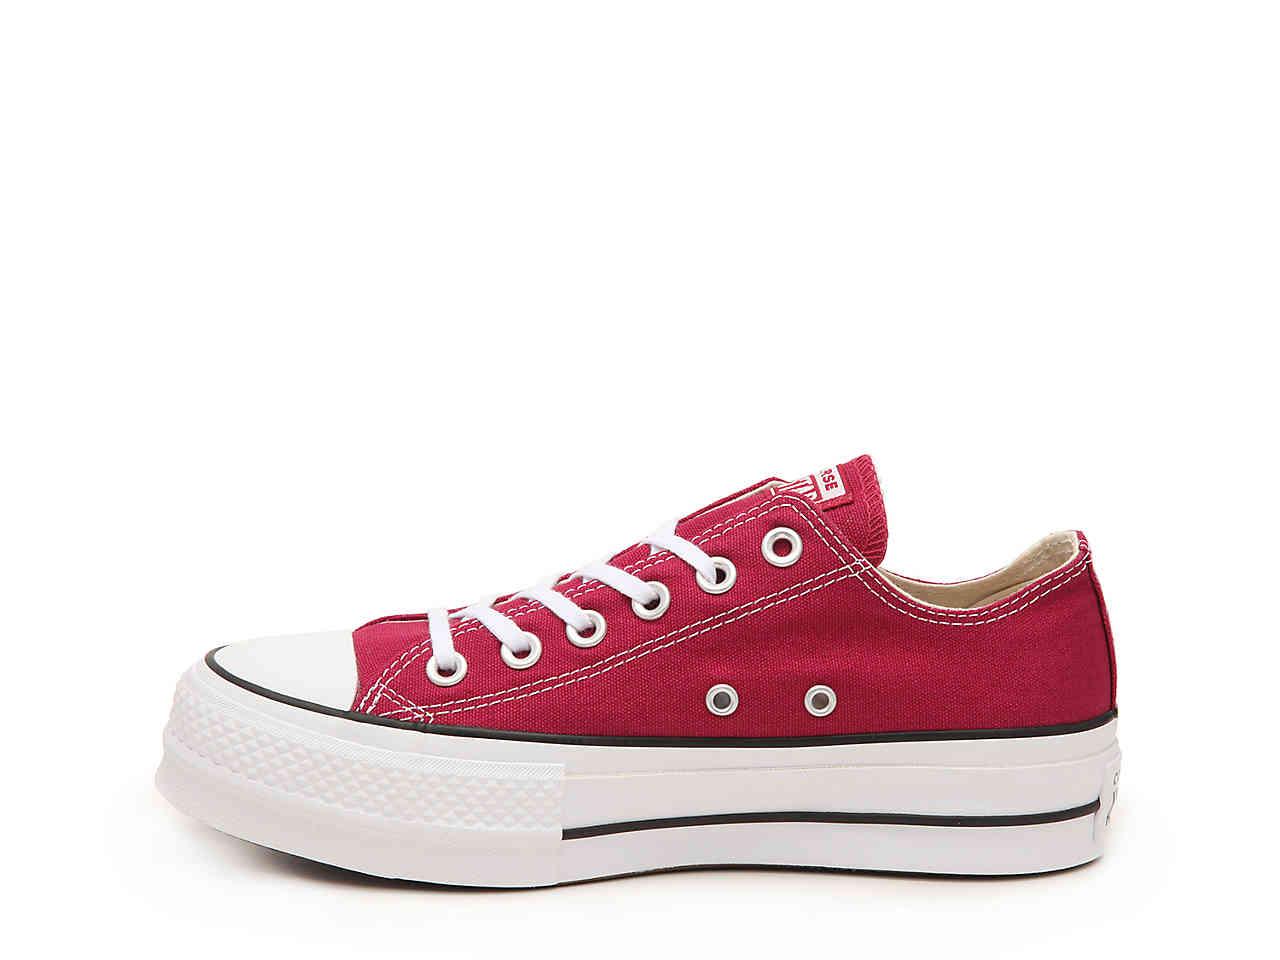 Converse Canvas Chuck Taylor All Star Lift Platform Sneaker in Red - Lyst